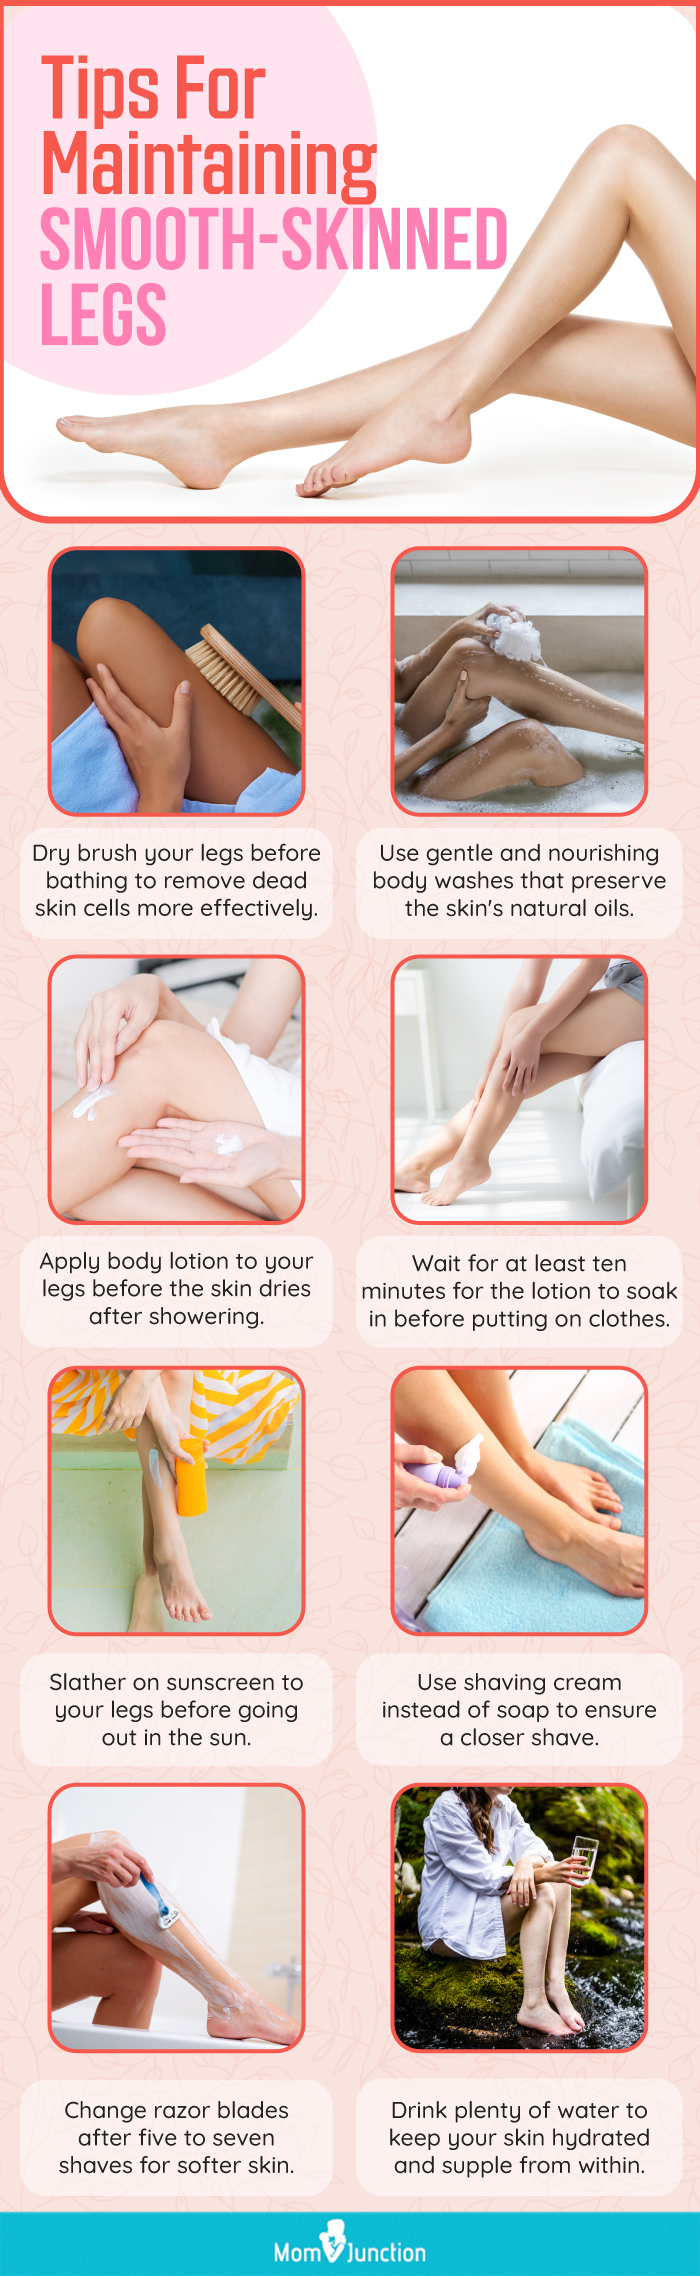 Tips For Maintaining Smooth Skinned Legs (infographic)